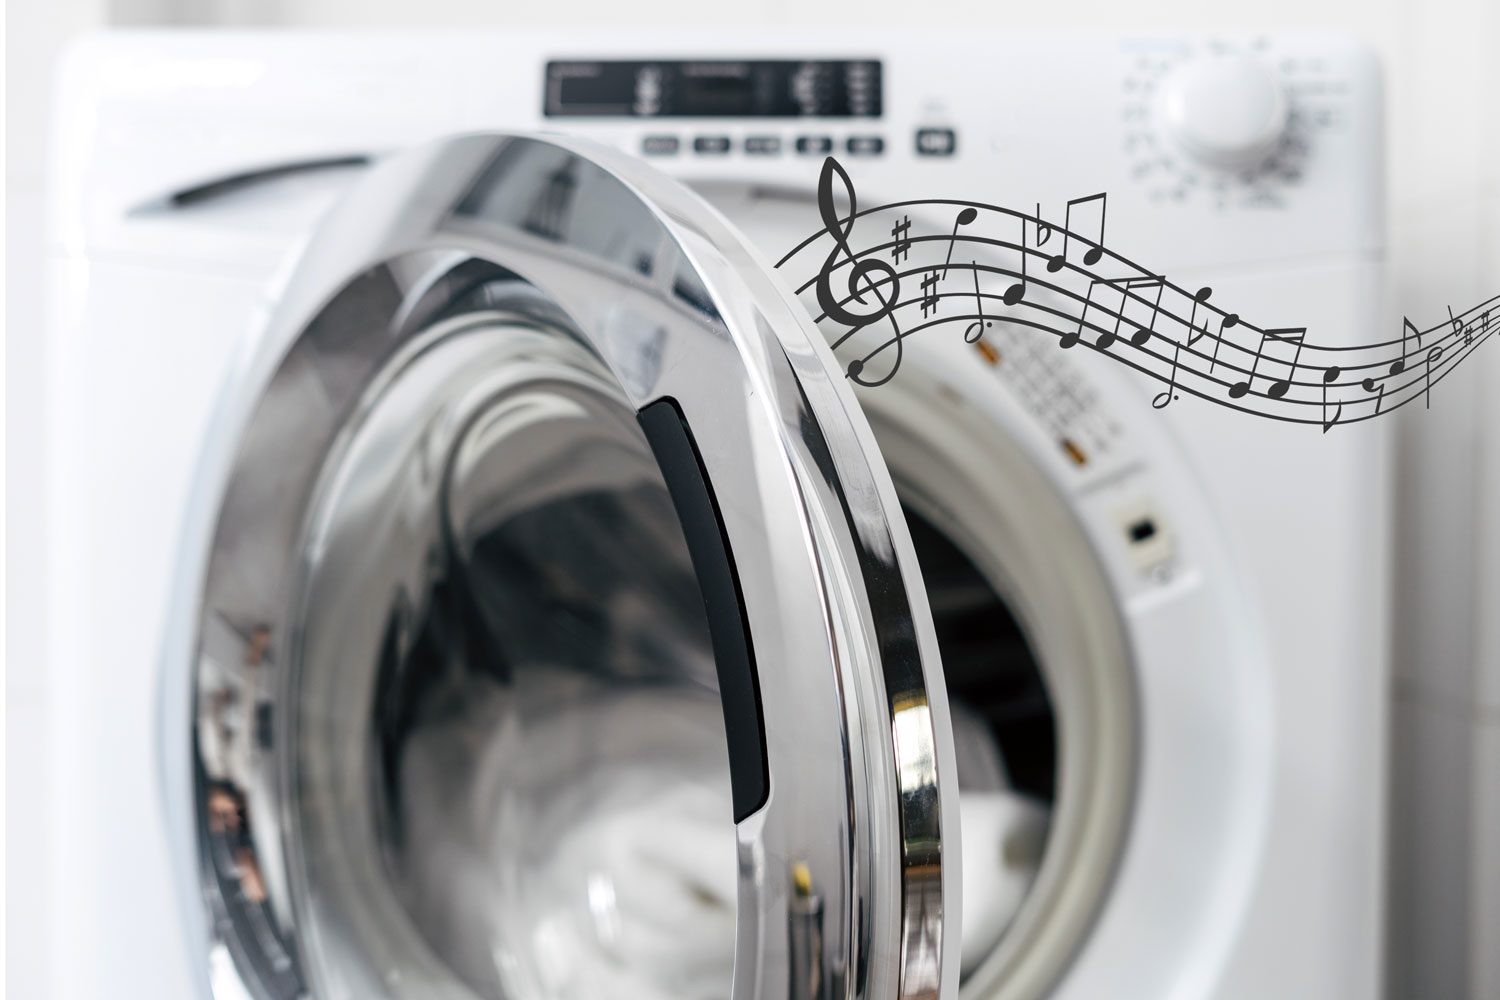 Washing Machine Singing Song and What the Song is